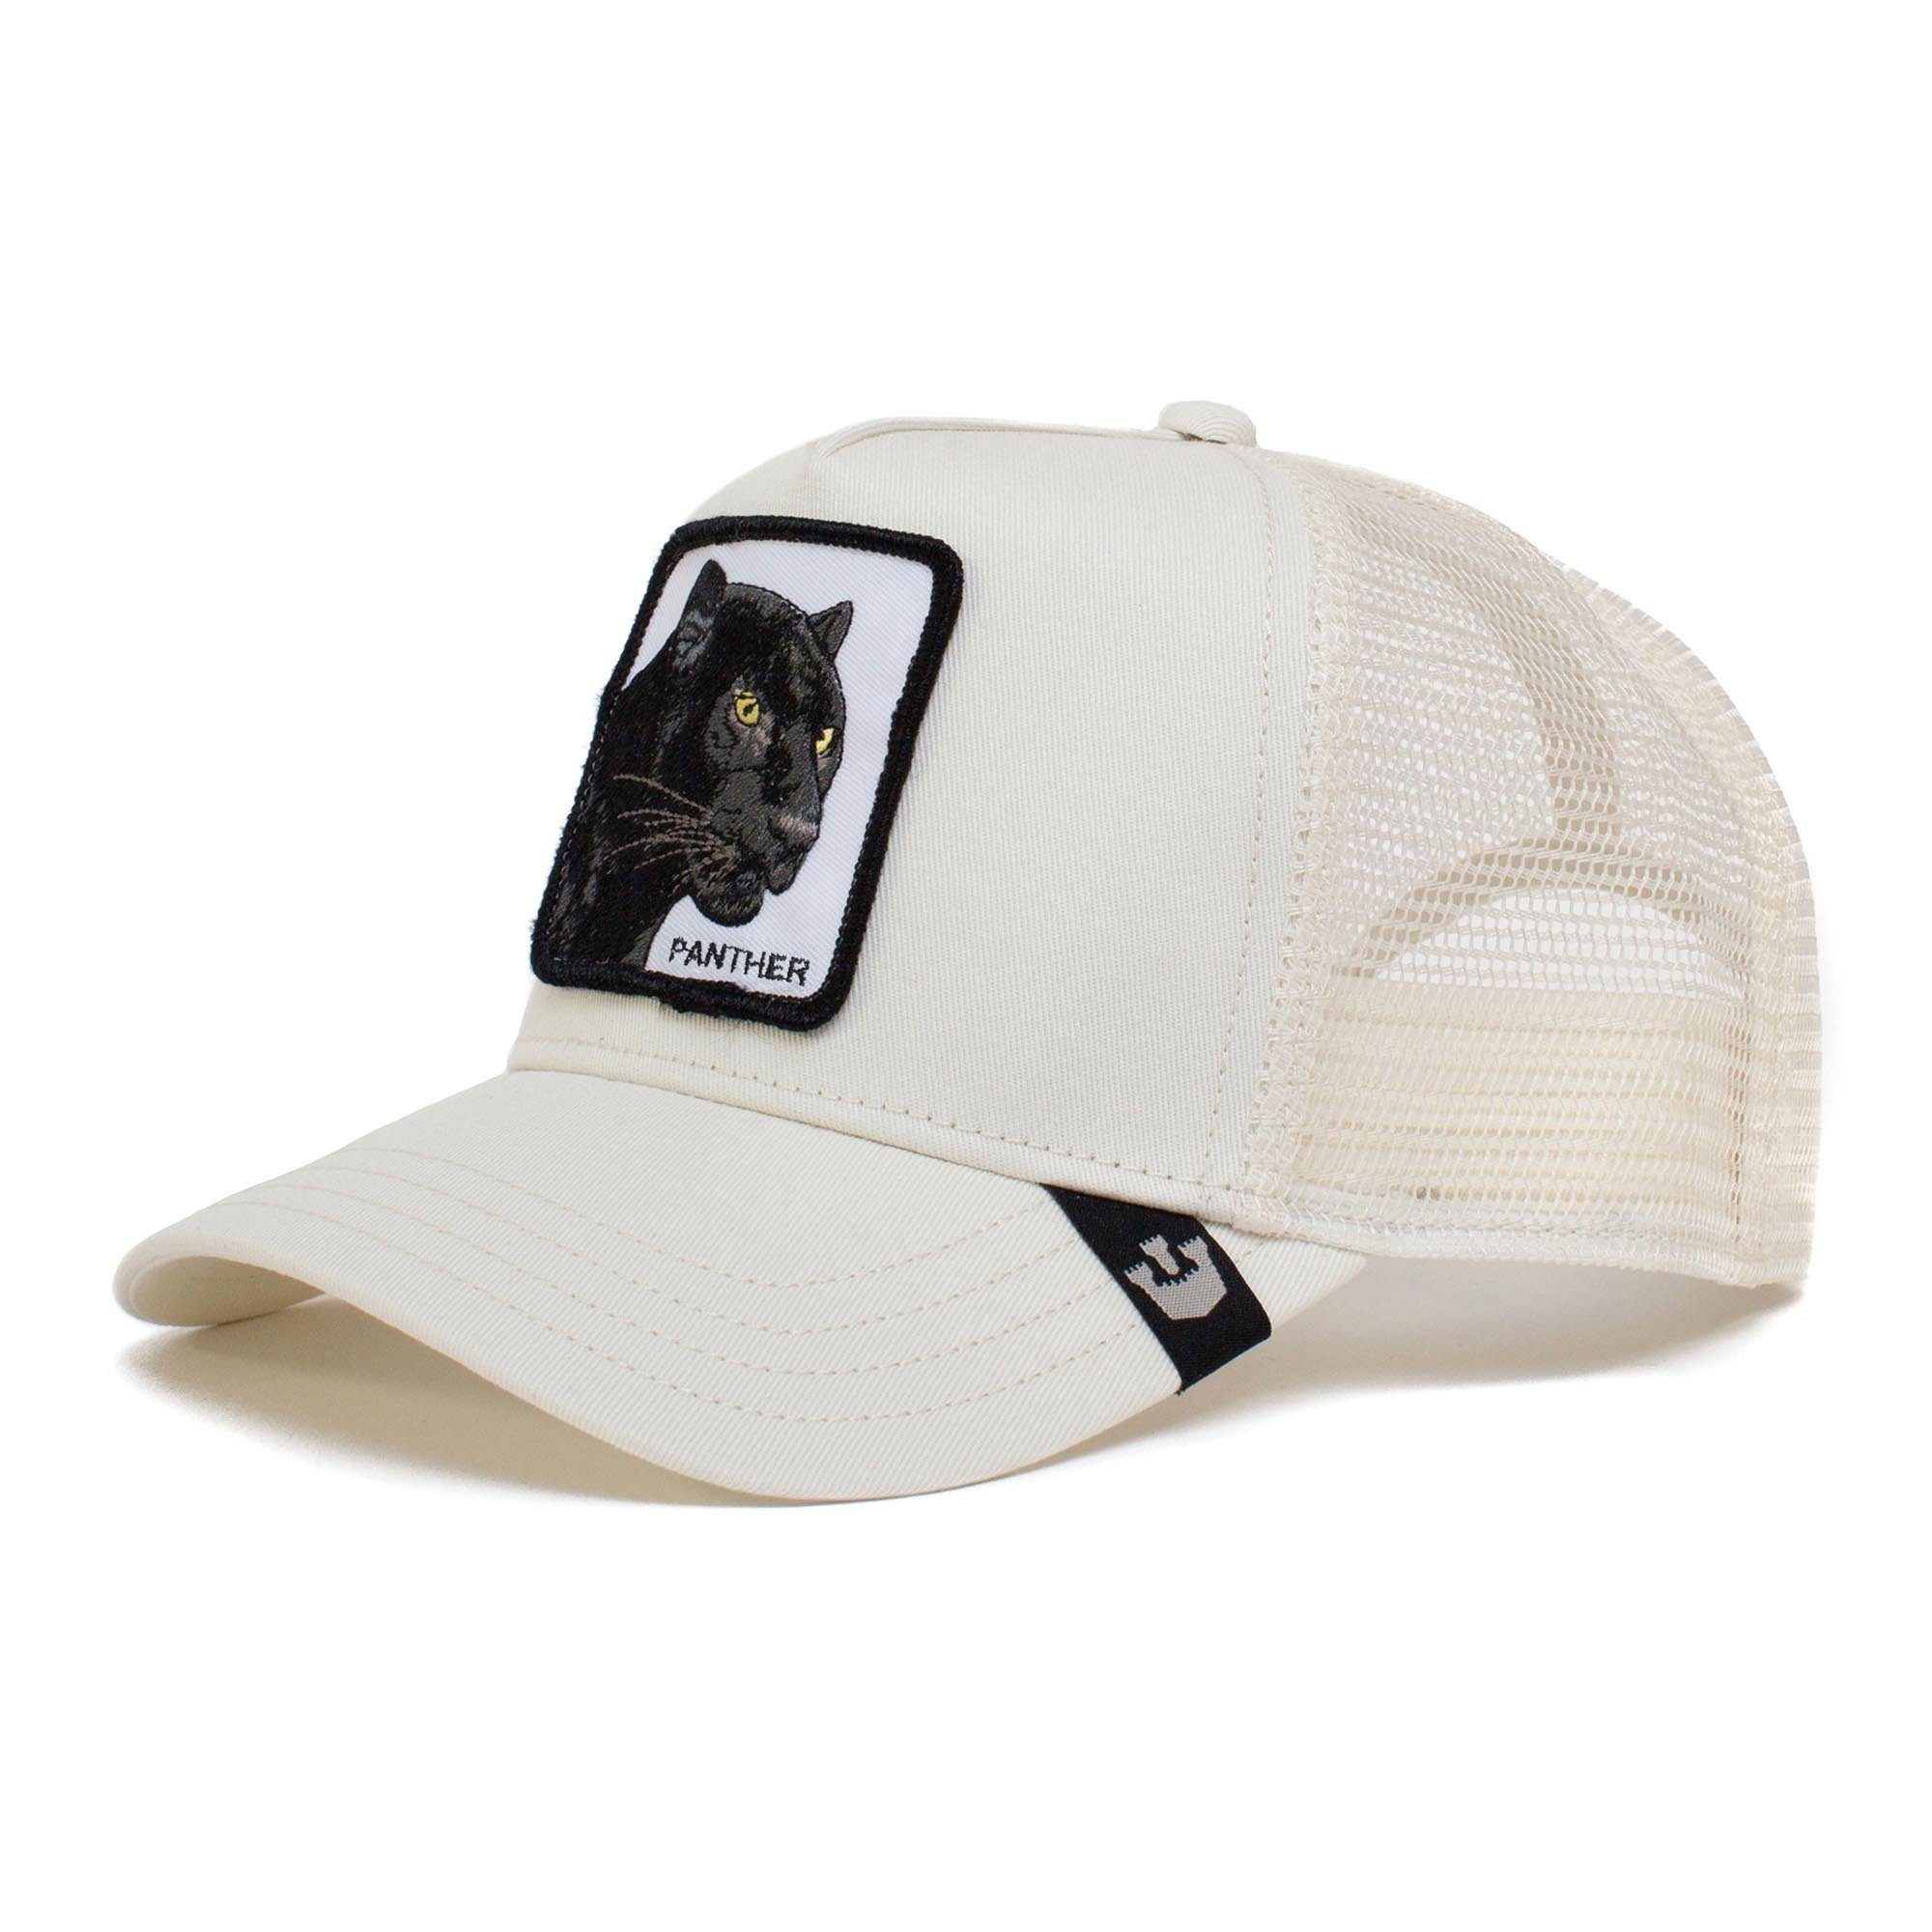 GOORIN Bros. Baseball Cap Unisex Trucker Cap - Kappe, Frontpatch, One Size The Panther white